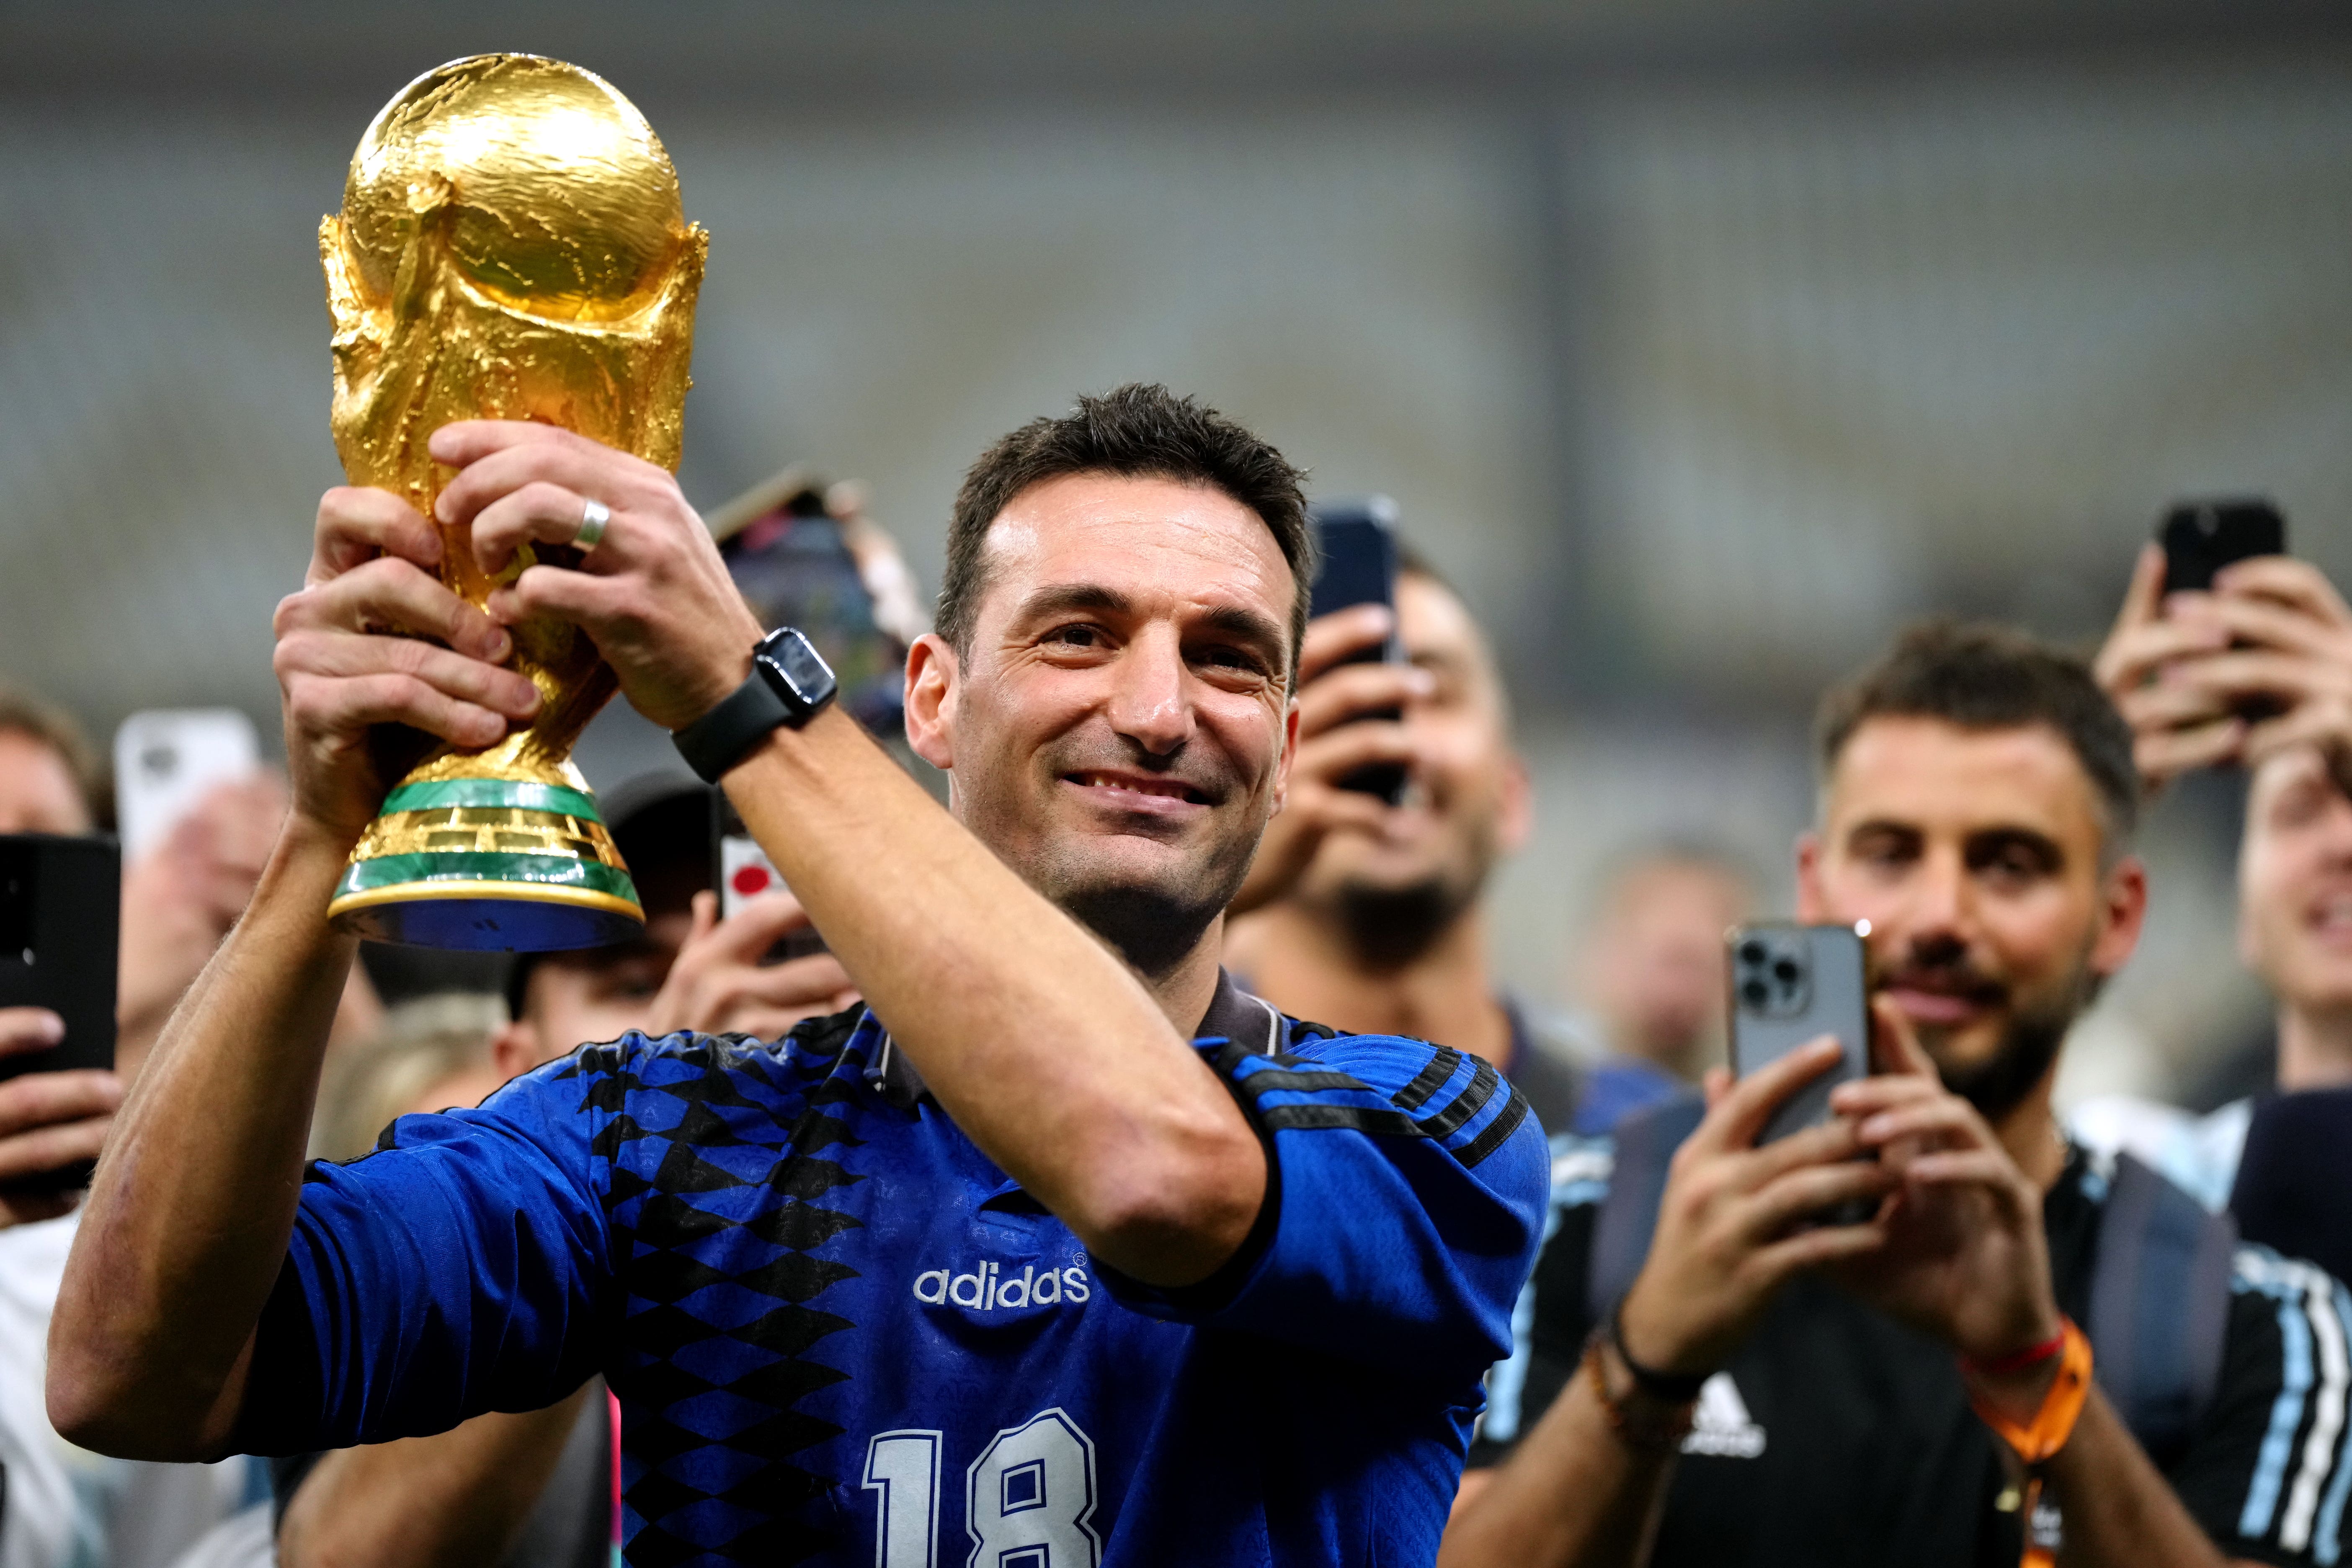 Scaloni was masterful in plotting his team’s run through the tournament